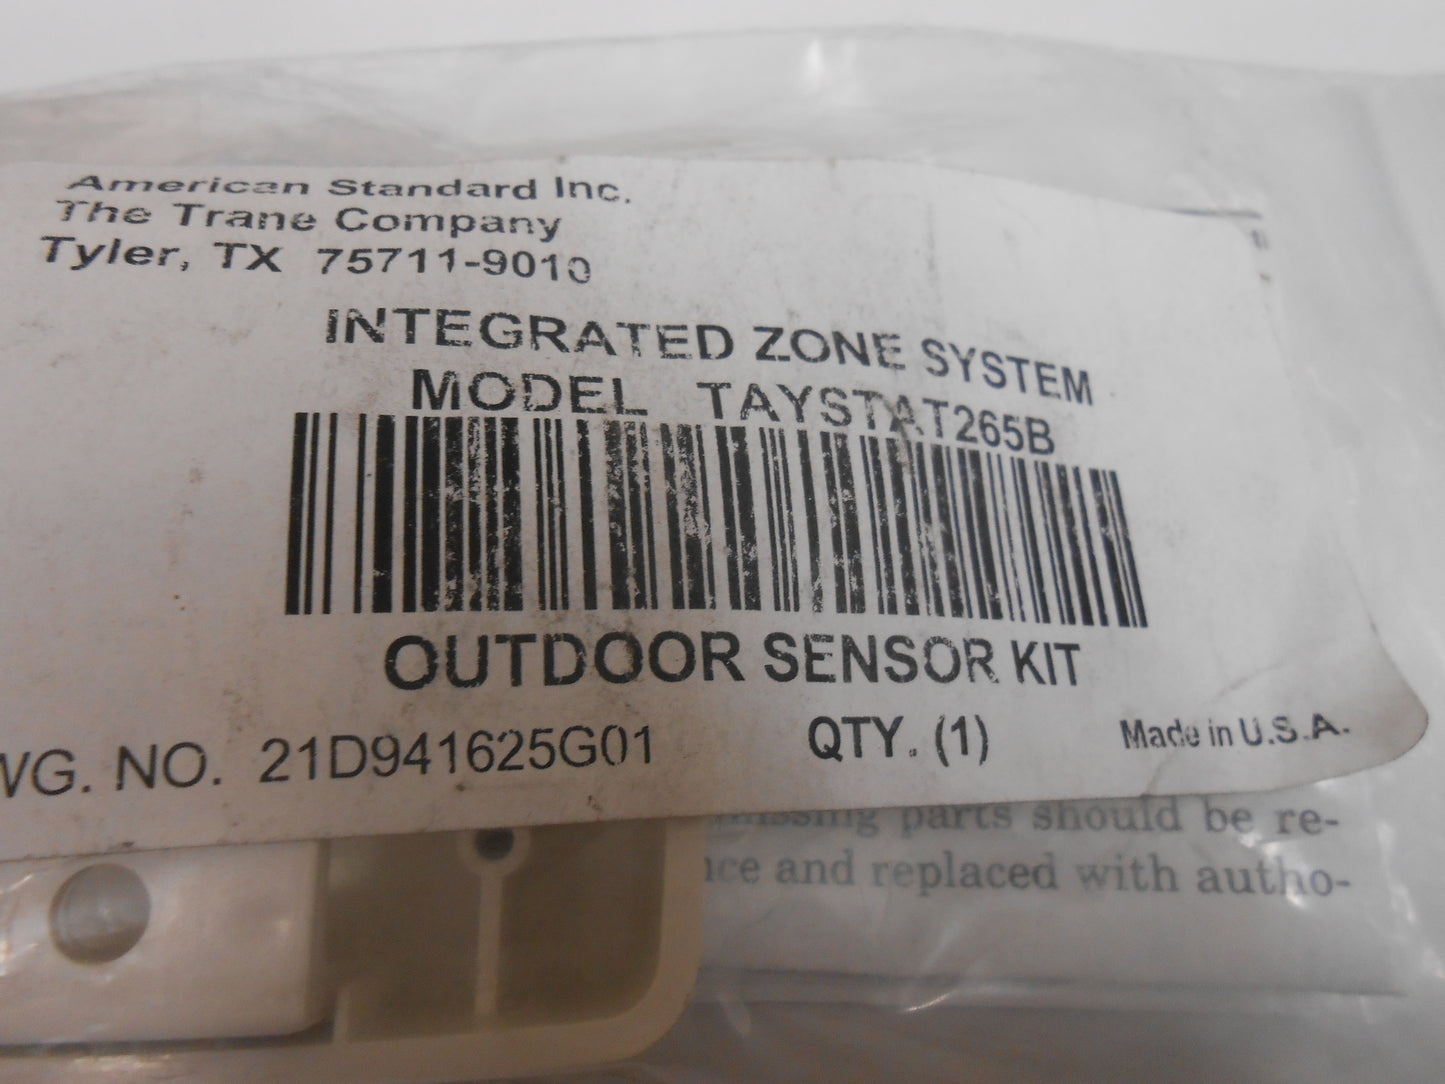 INTEGRATED ZONE SYSTEM OUTDOOR ANALOG TEMPERATURE SENSOR KIT